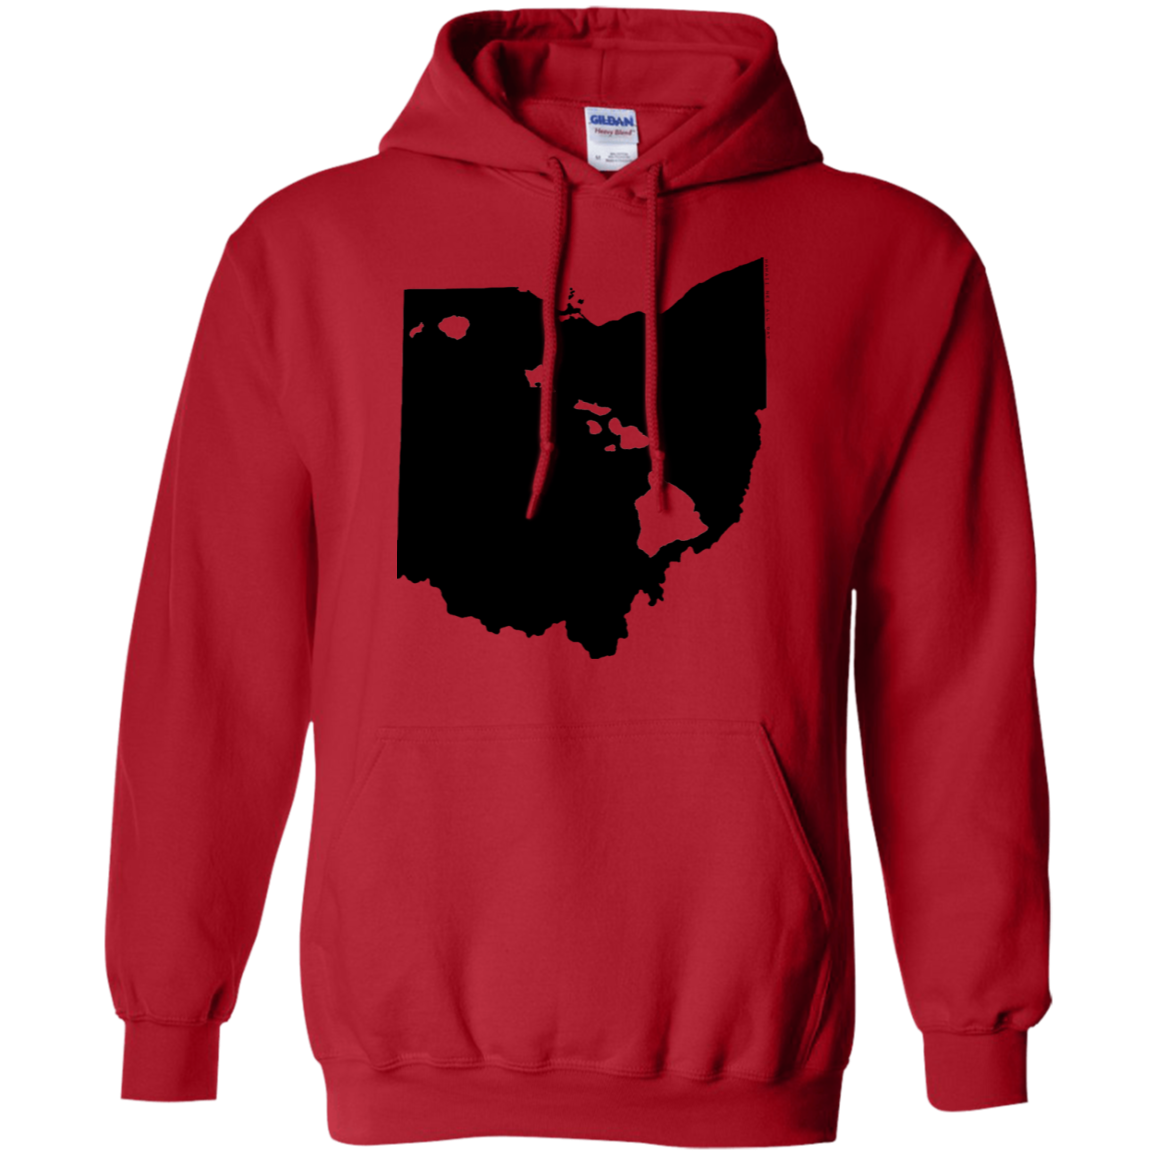 Living in Ohio with Hawaii Roots Pullover Hoodie 8 oz., Sweatshirts, Hawaii Nei All Day